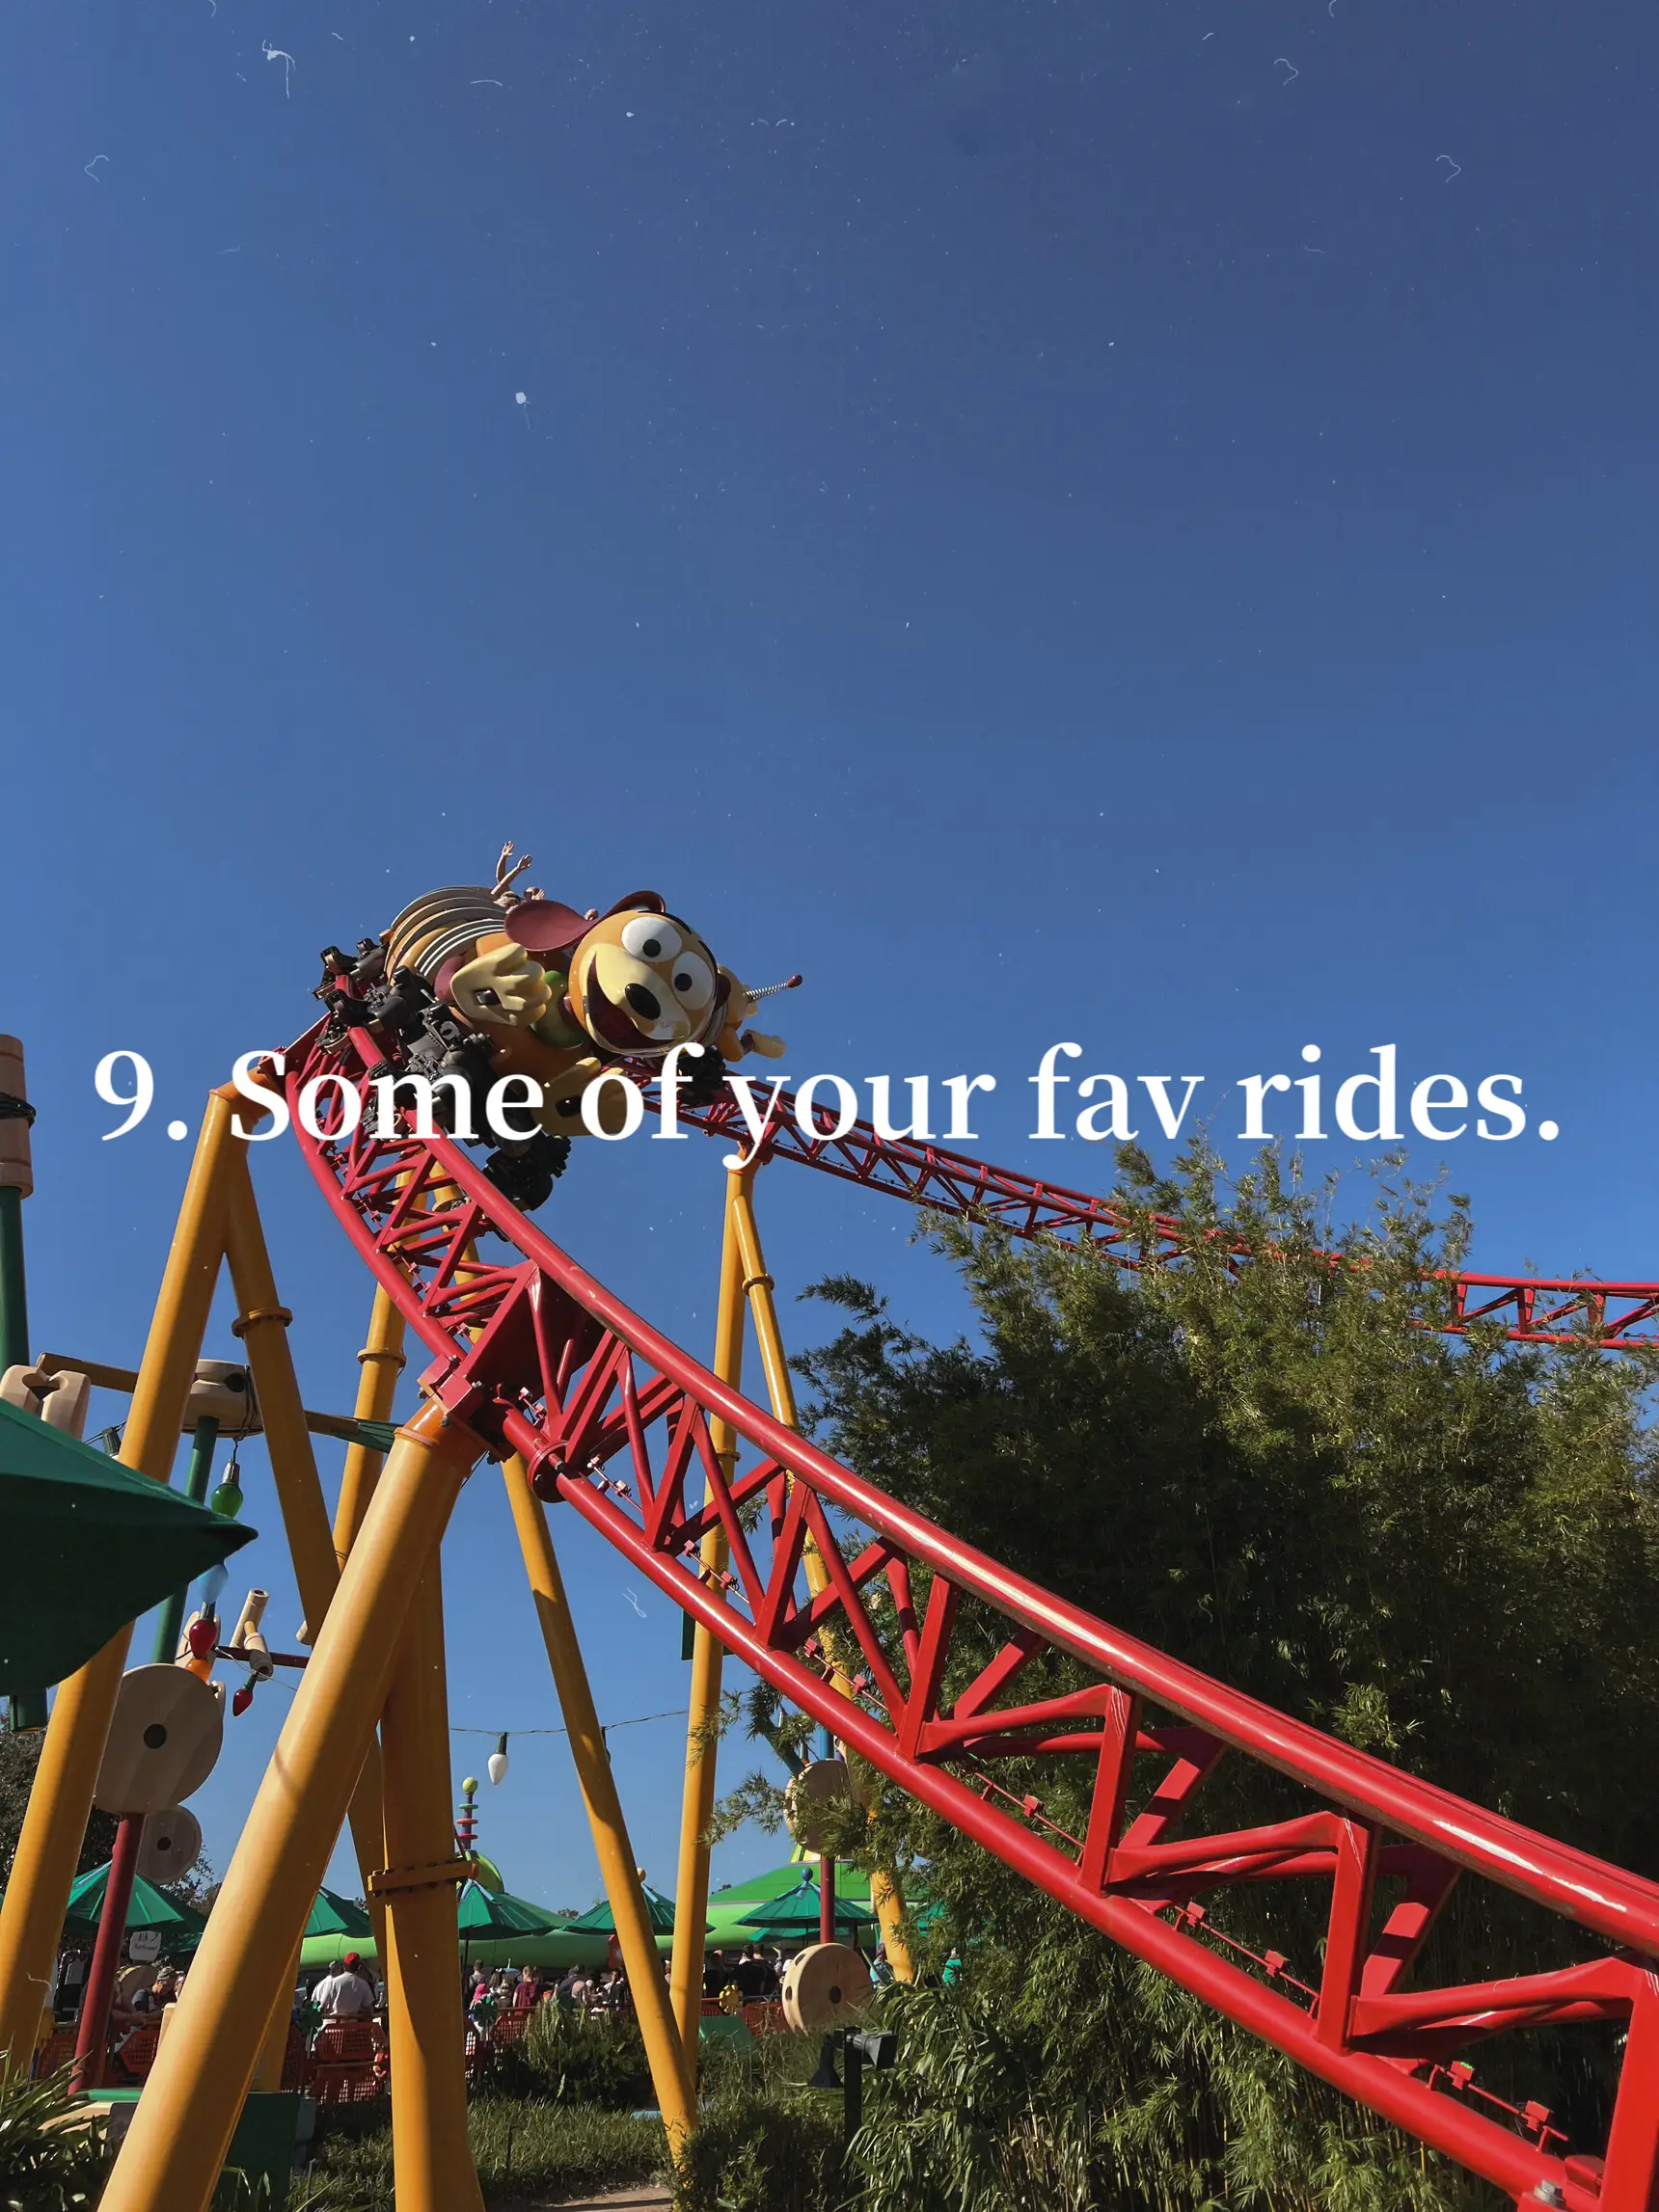  A roller coaster with a sign that says "9. Some of your fav rides".